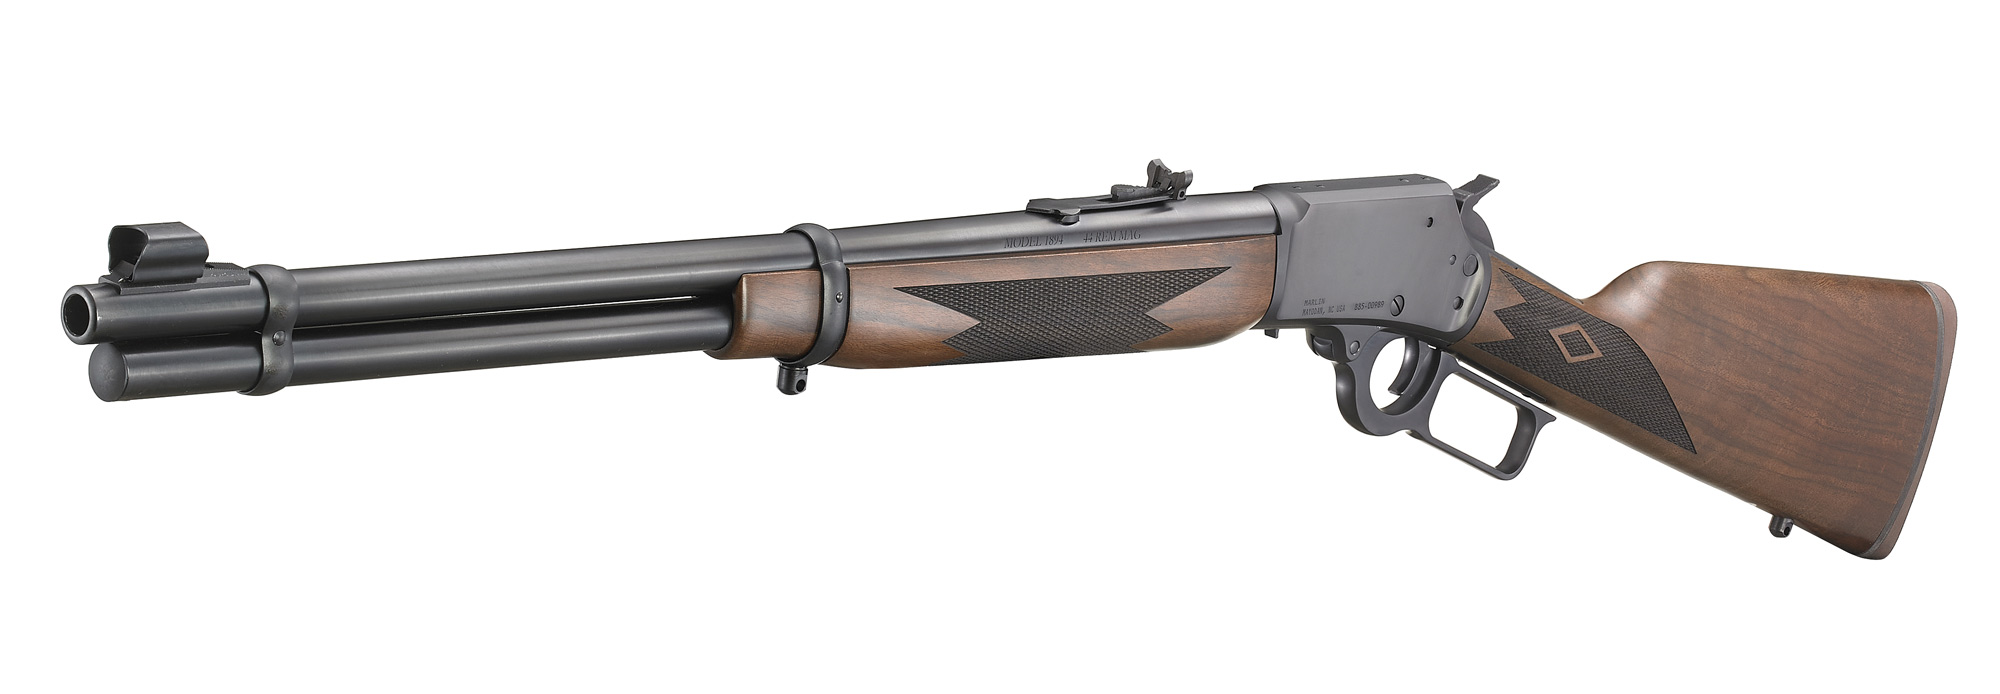  Sturm, Ruger & Co., Inc. brings back the Marlin 1894 Lever-Action Rifle.